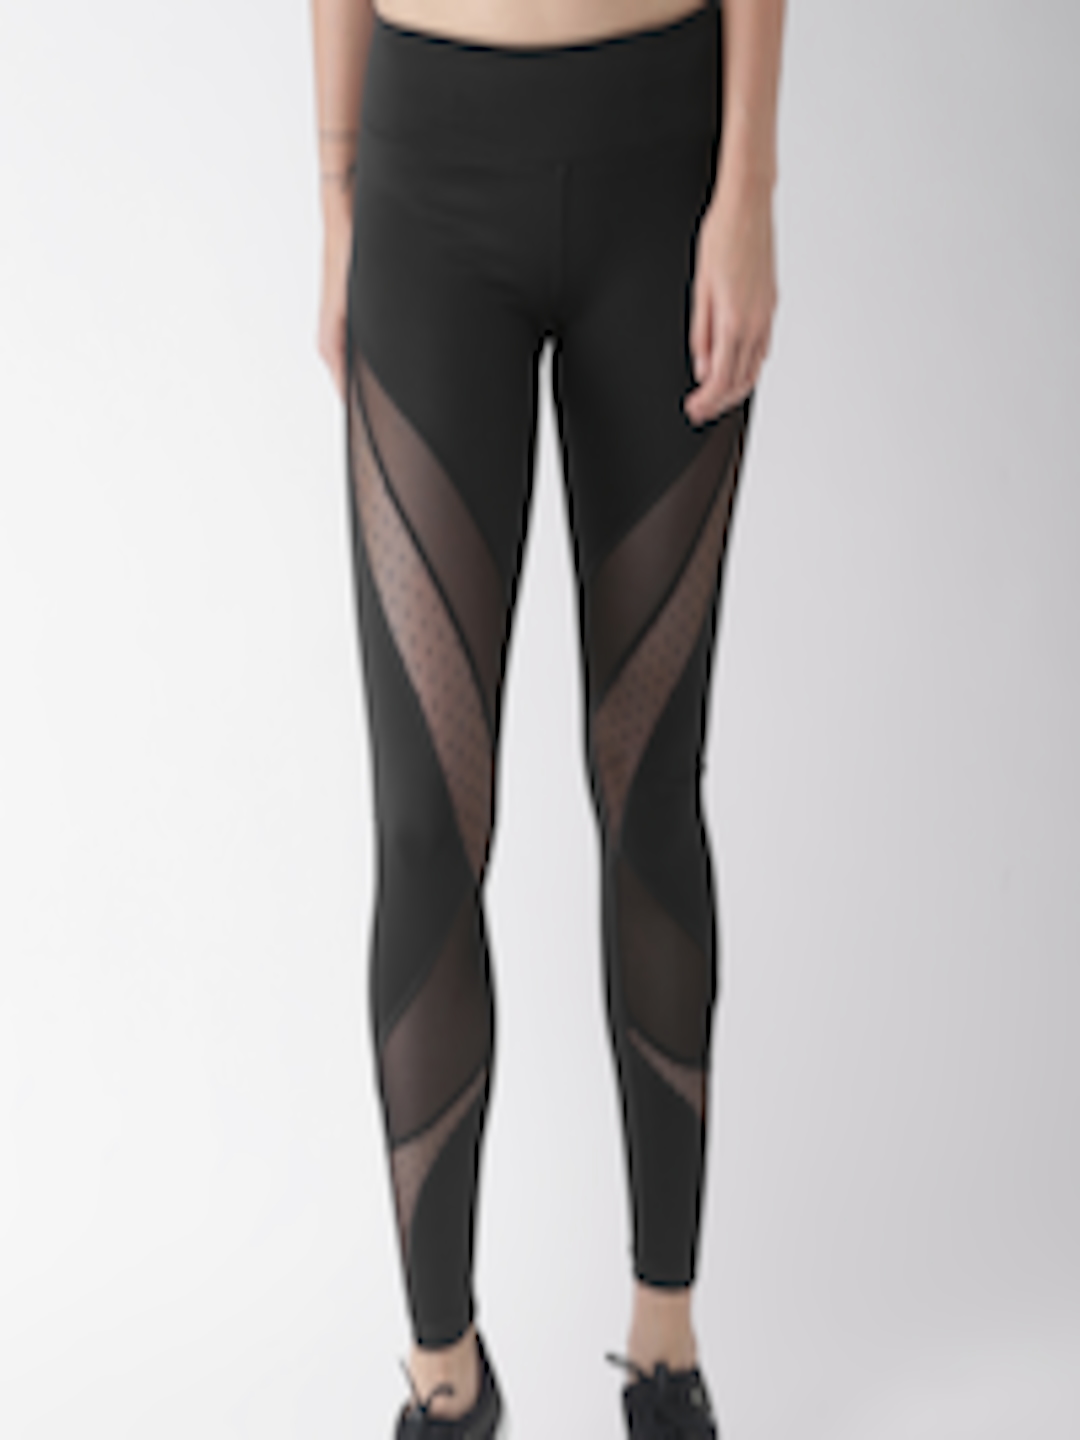 Buy FOREVER 21 Black Tights - Tights for Women 2100014 | Myntra